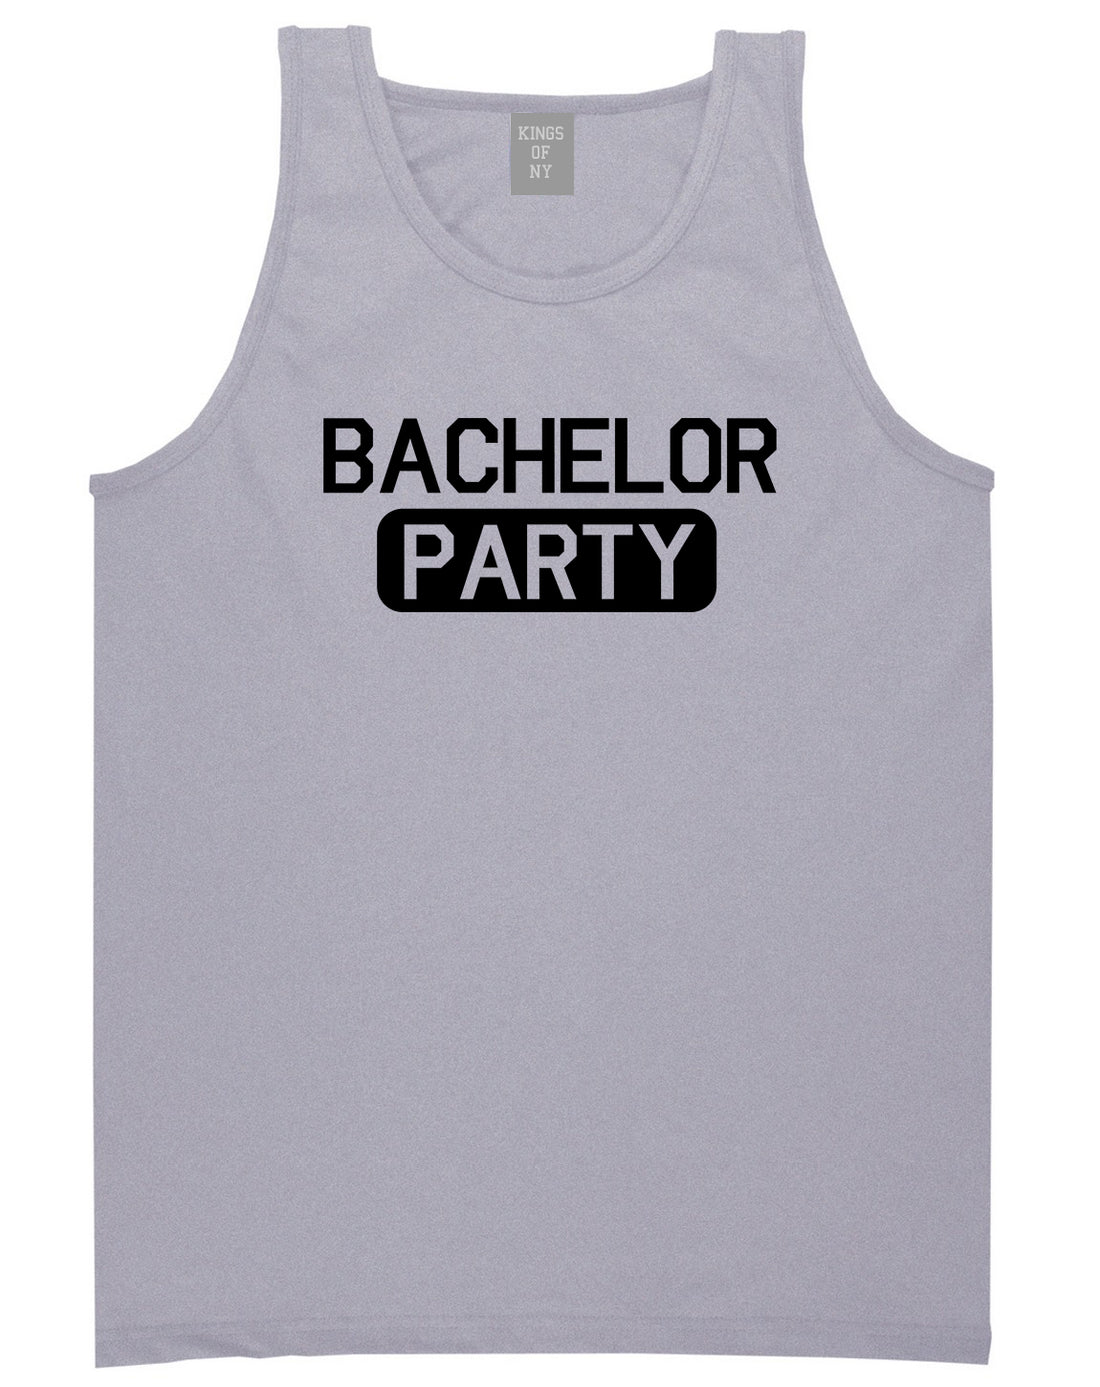 Bachelor Party Grey Tank Top Shirt by Kings Of NY